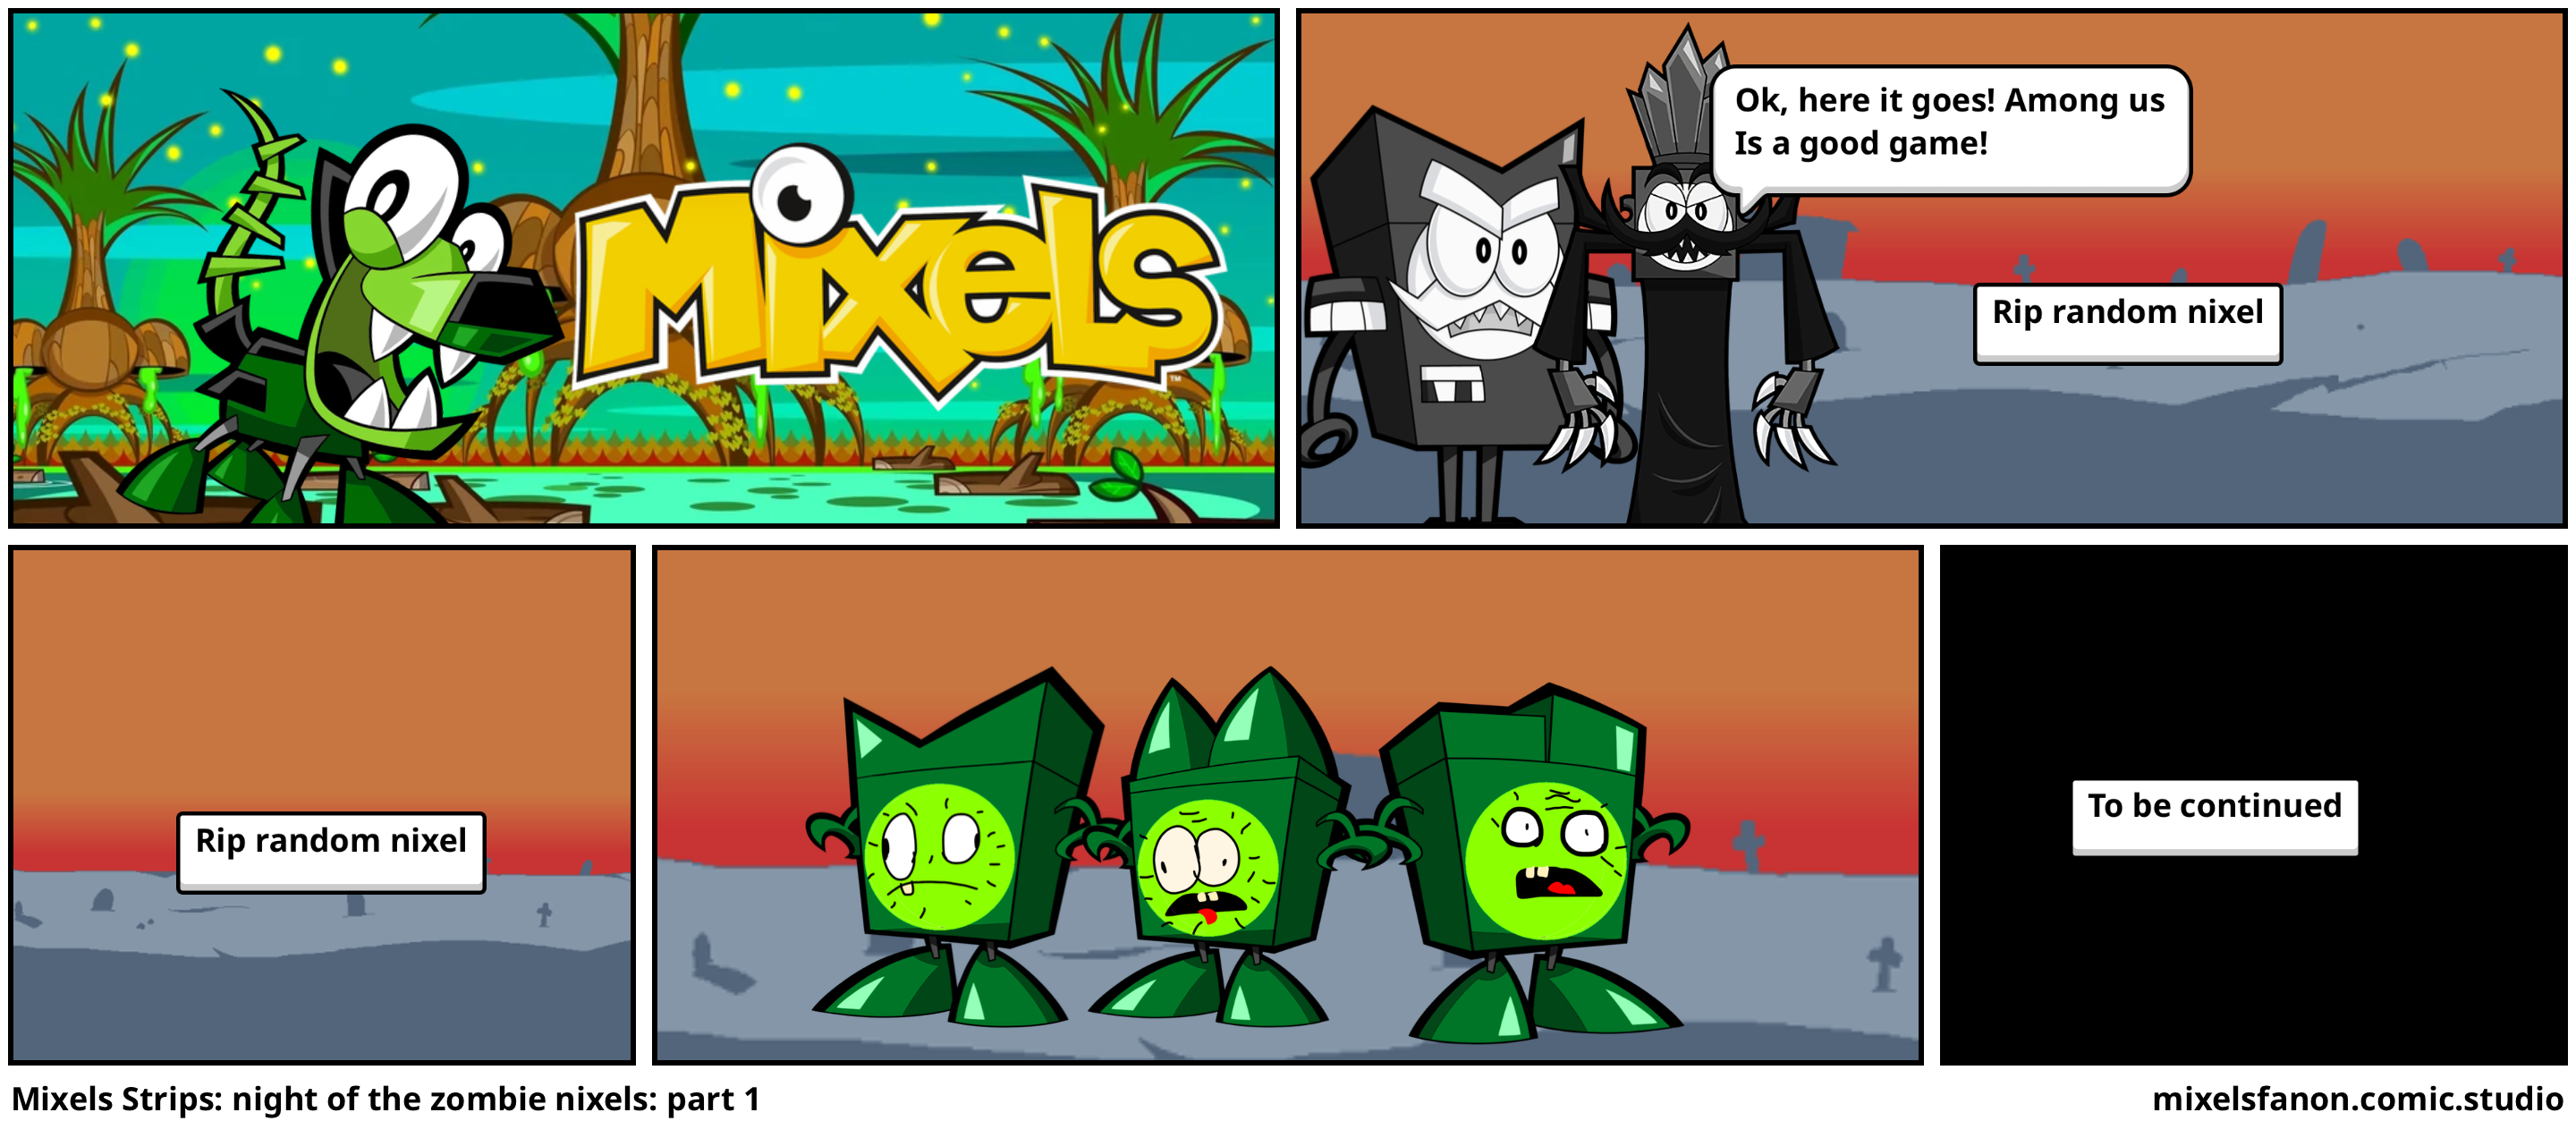 Mixels Strips: night of the zombie nixels: part 1